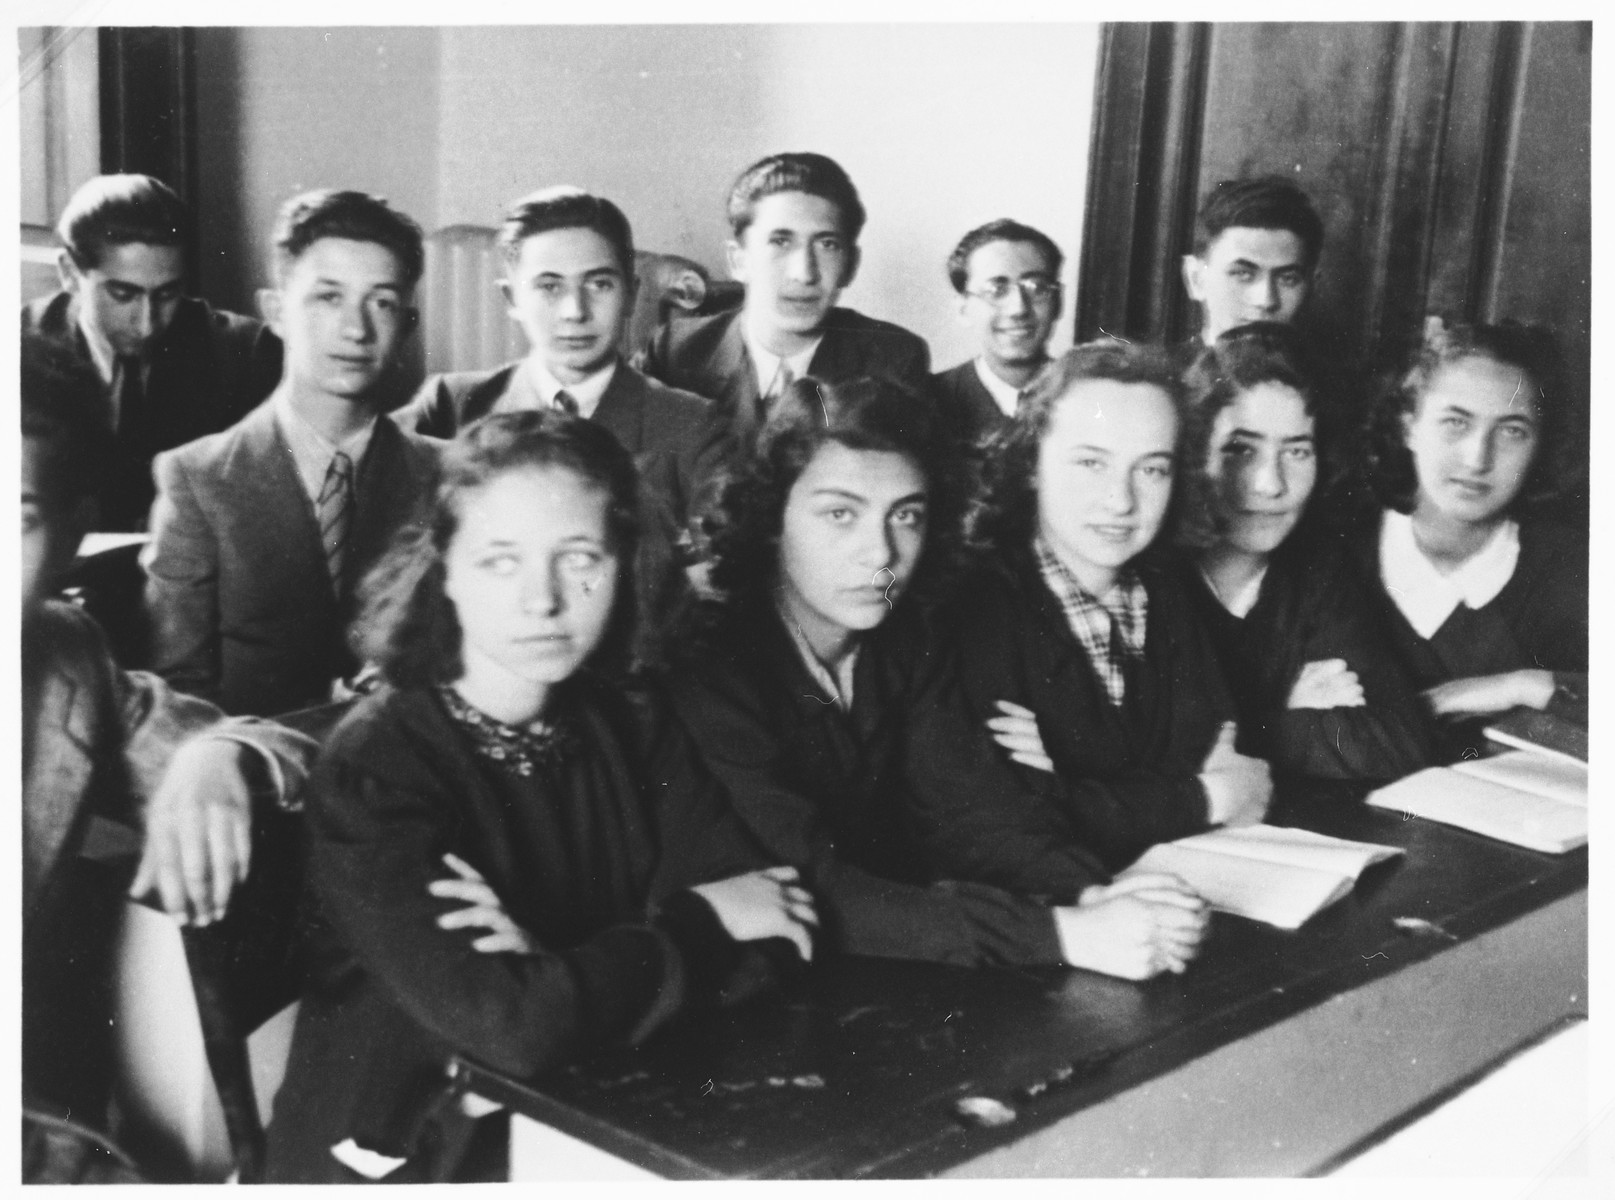 Students in the Jewish high school in Milan.